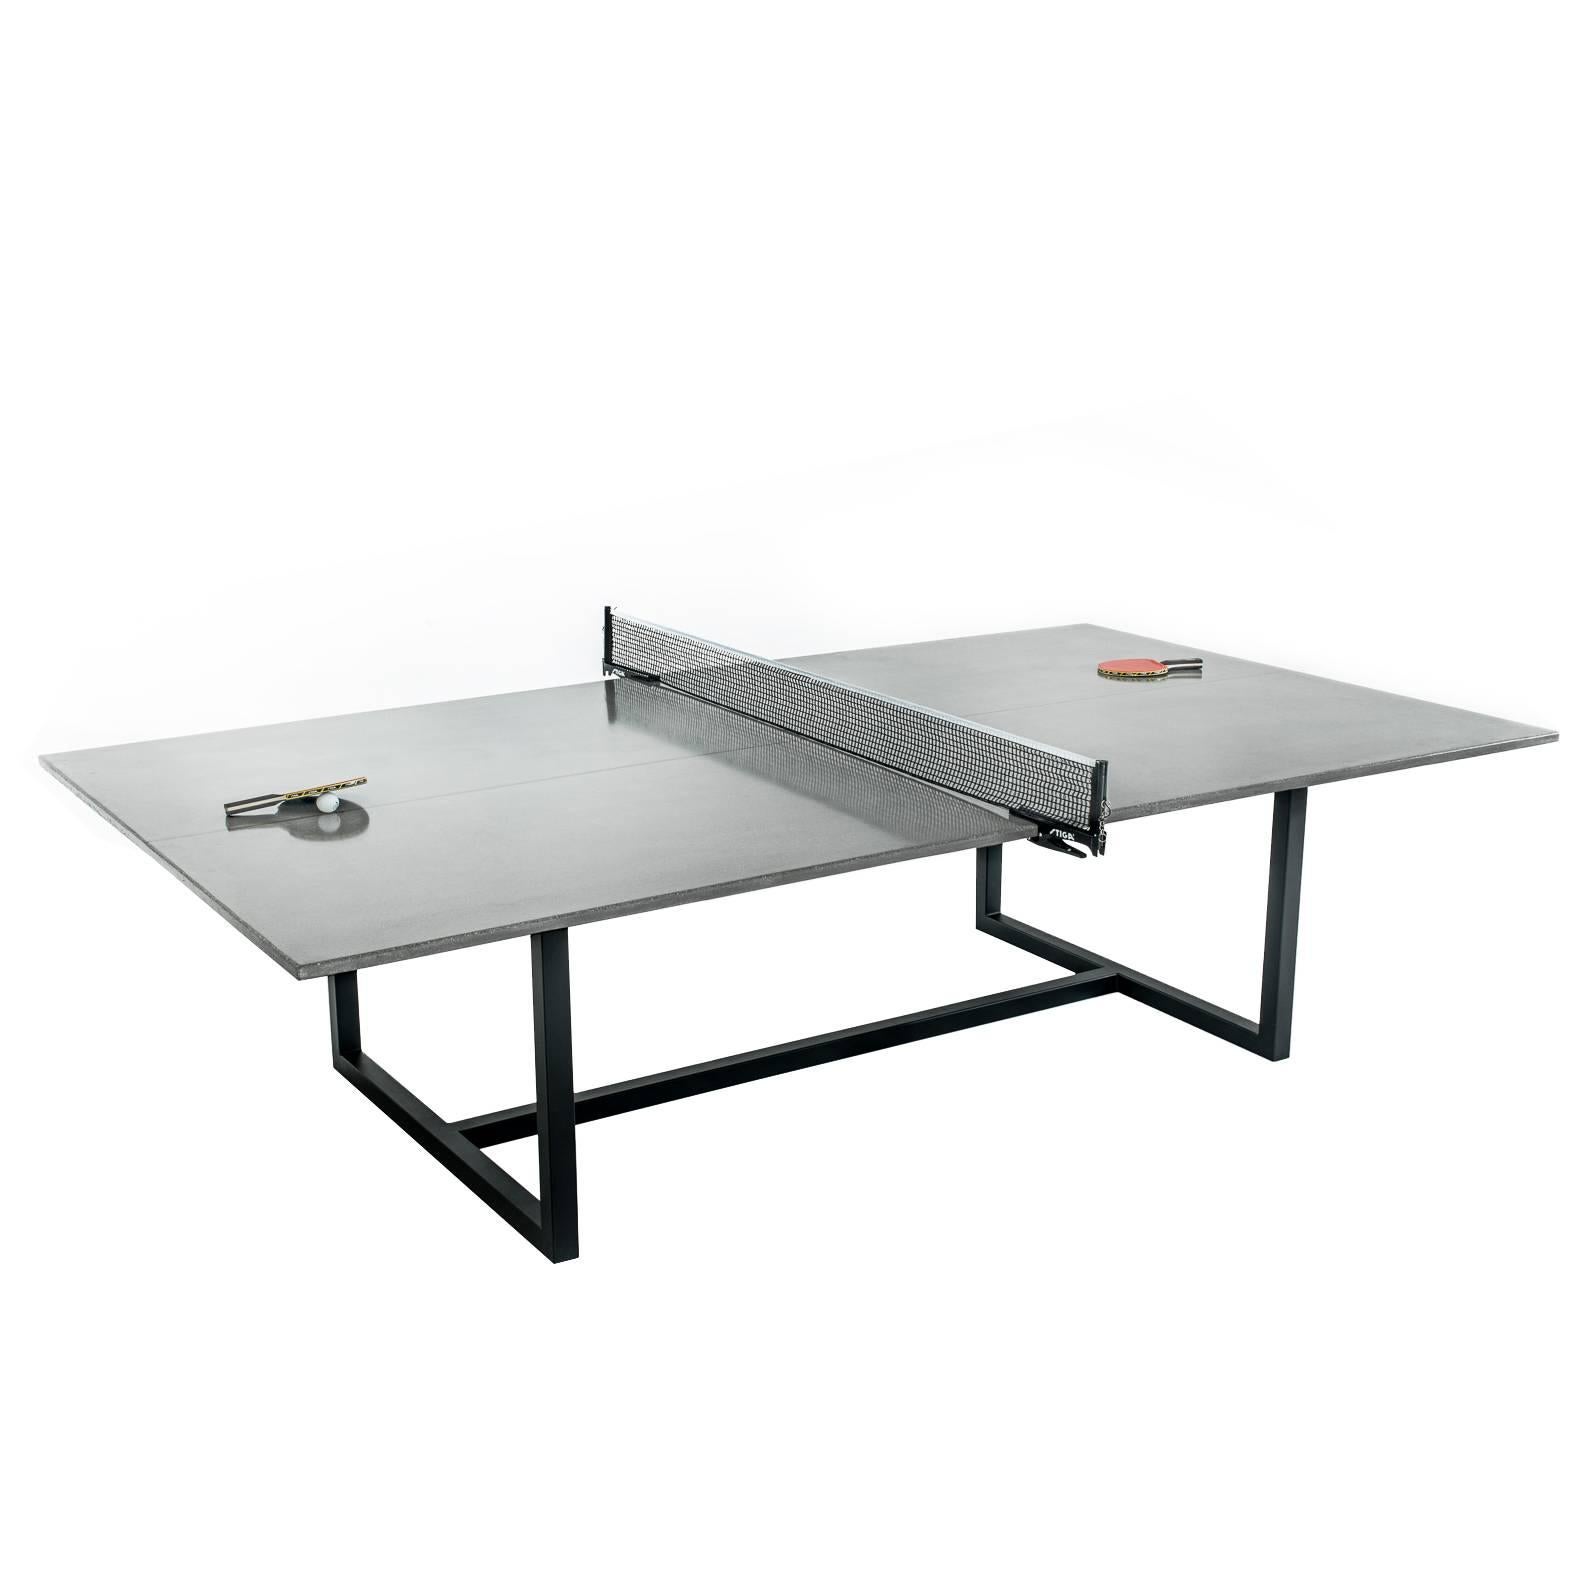 James de Wulf Vue Concrete Ping Pong Table with Powder Coated Steel Base